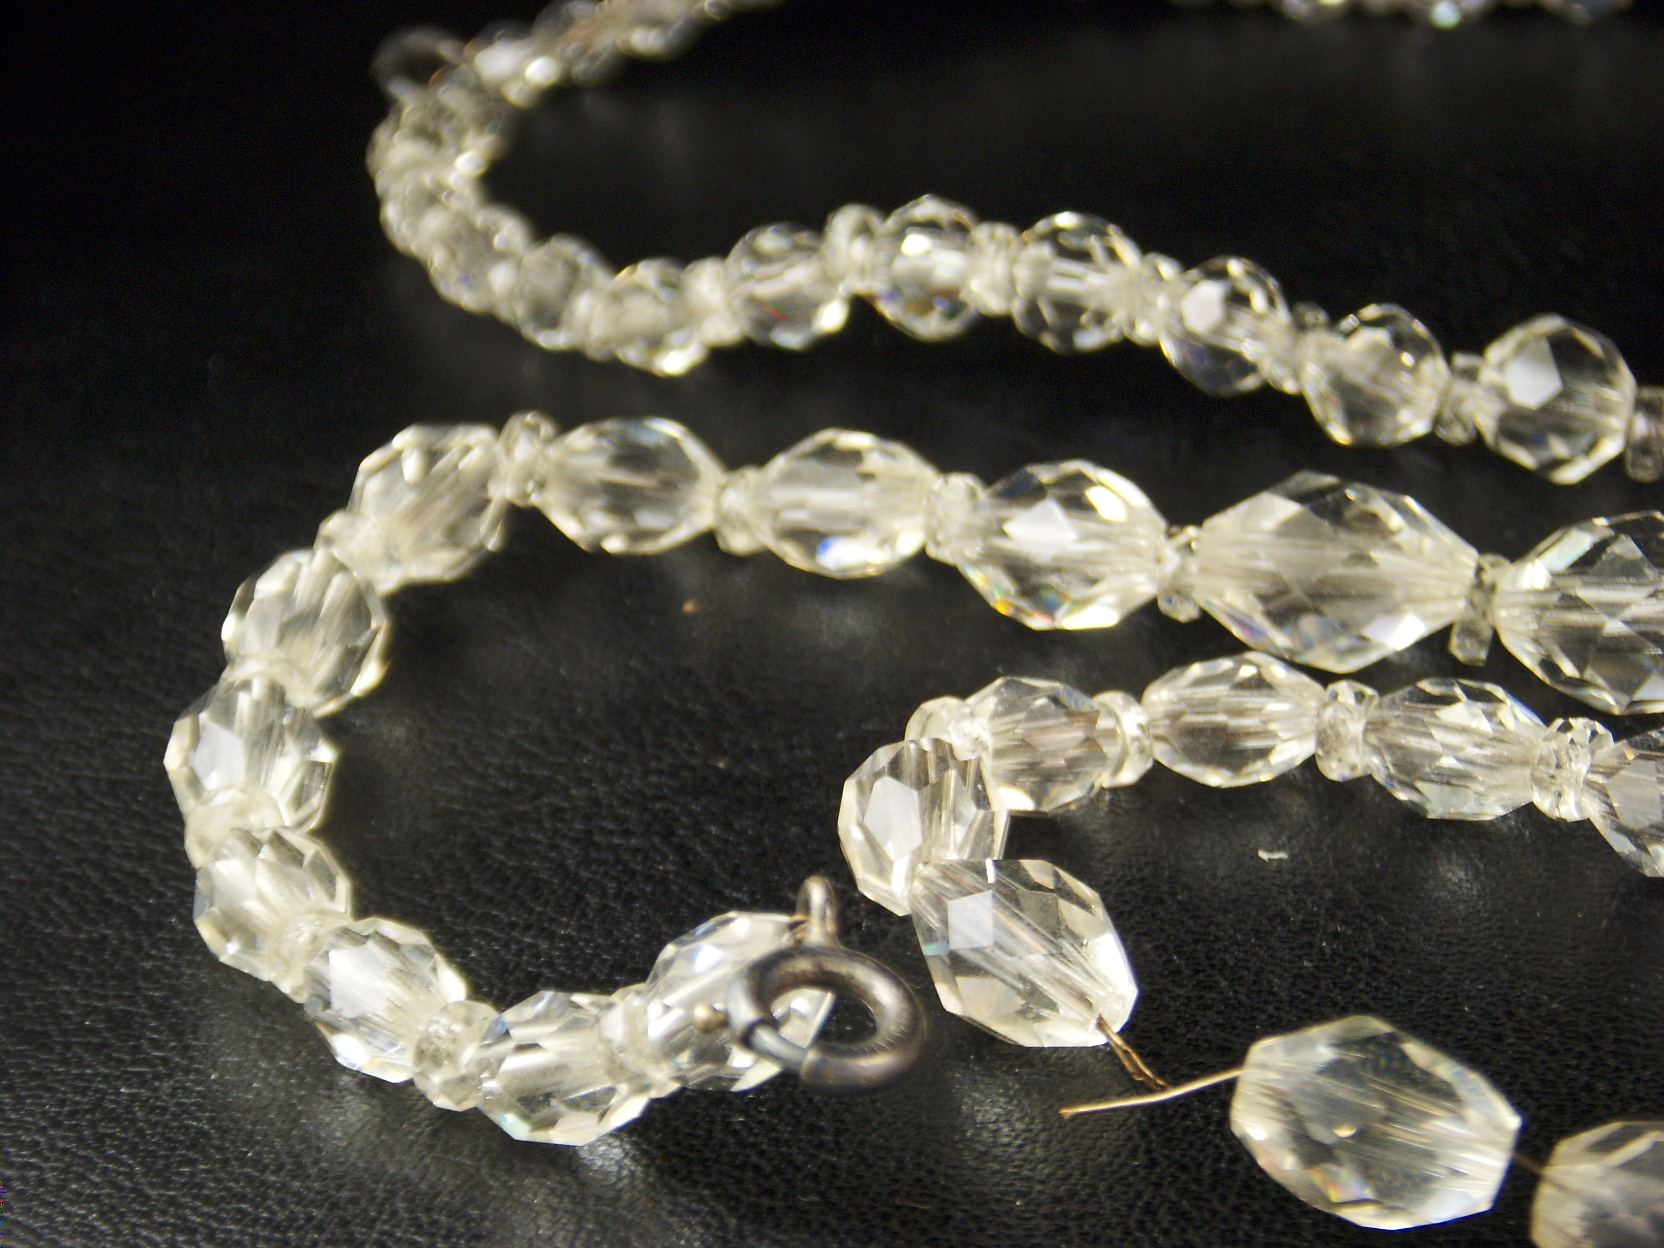 Old Crystal Necklaces | Antiques Board